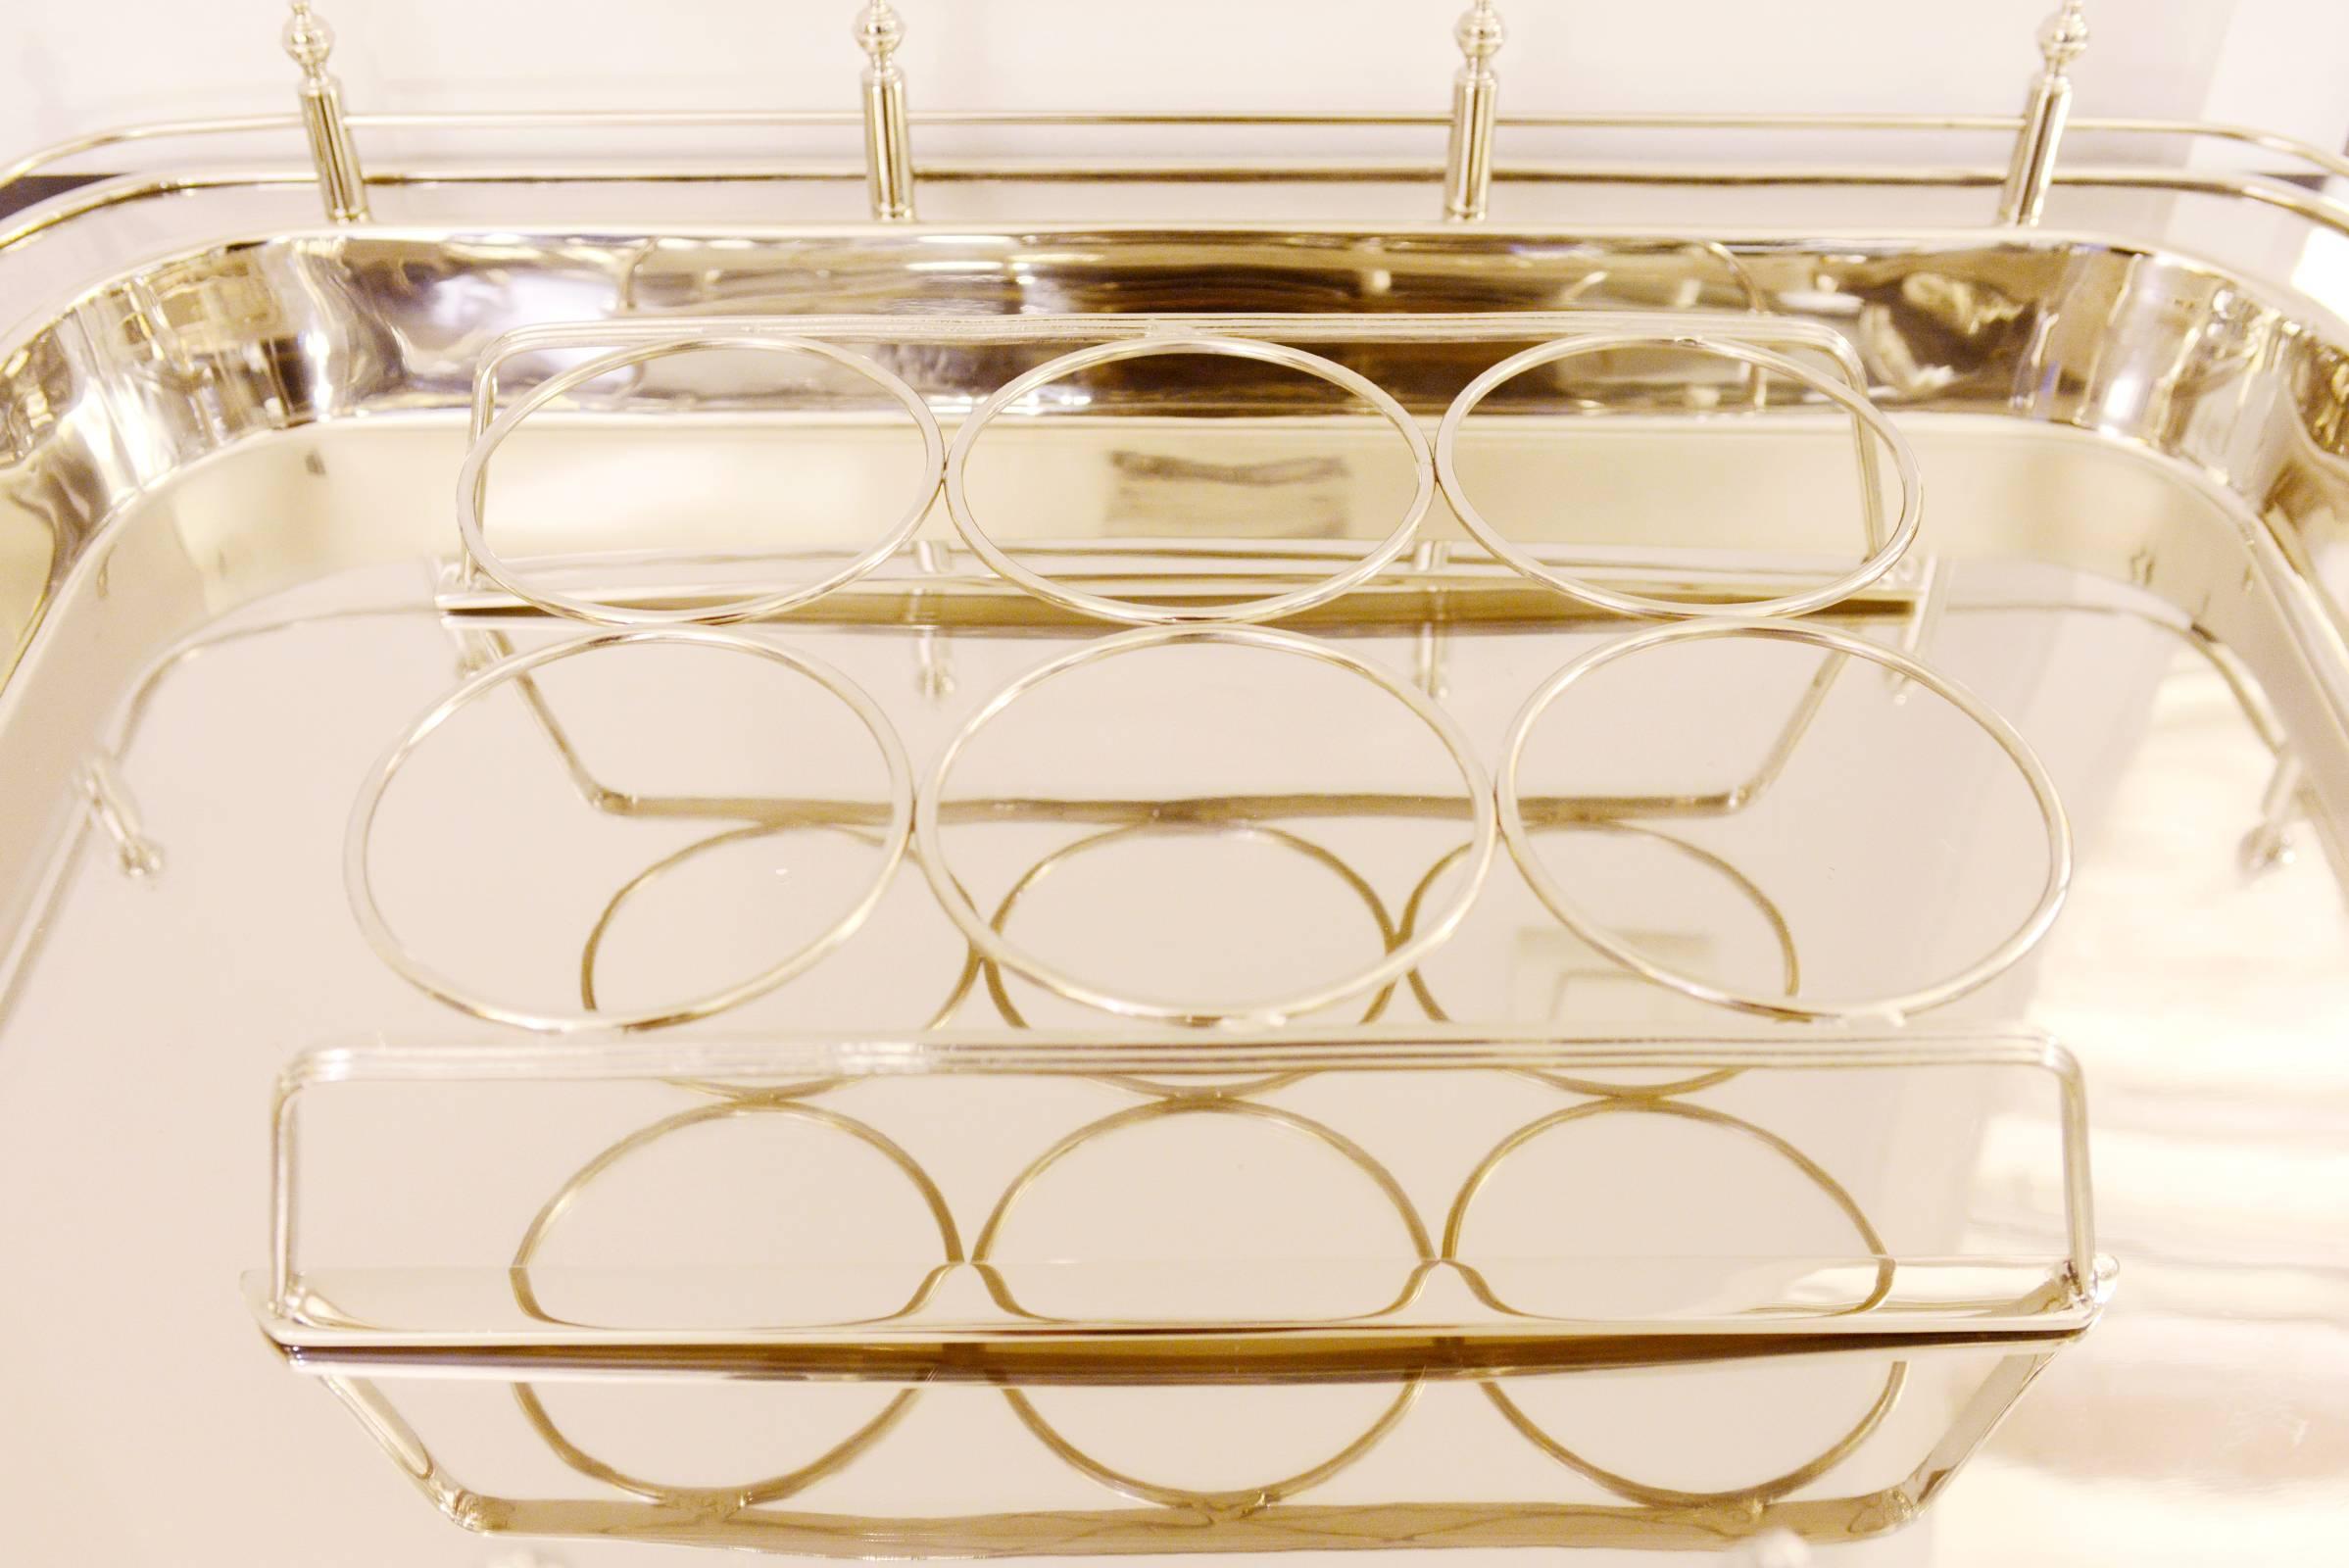 Contemporary Bar Tray in Polished Nickel Finish on Mango Wood Base For Sale